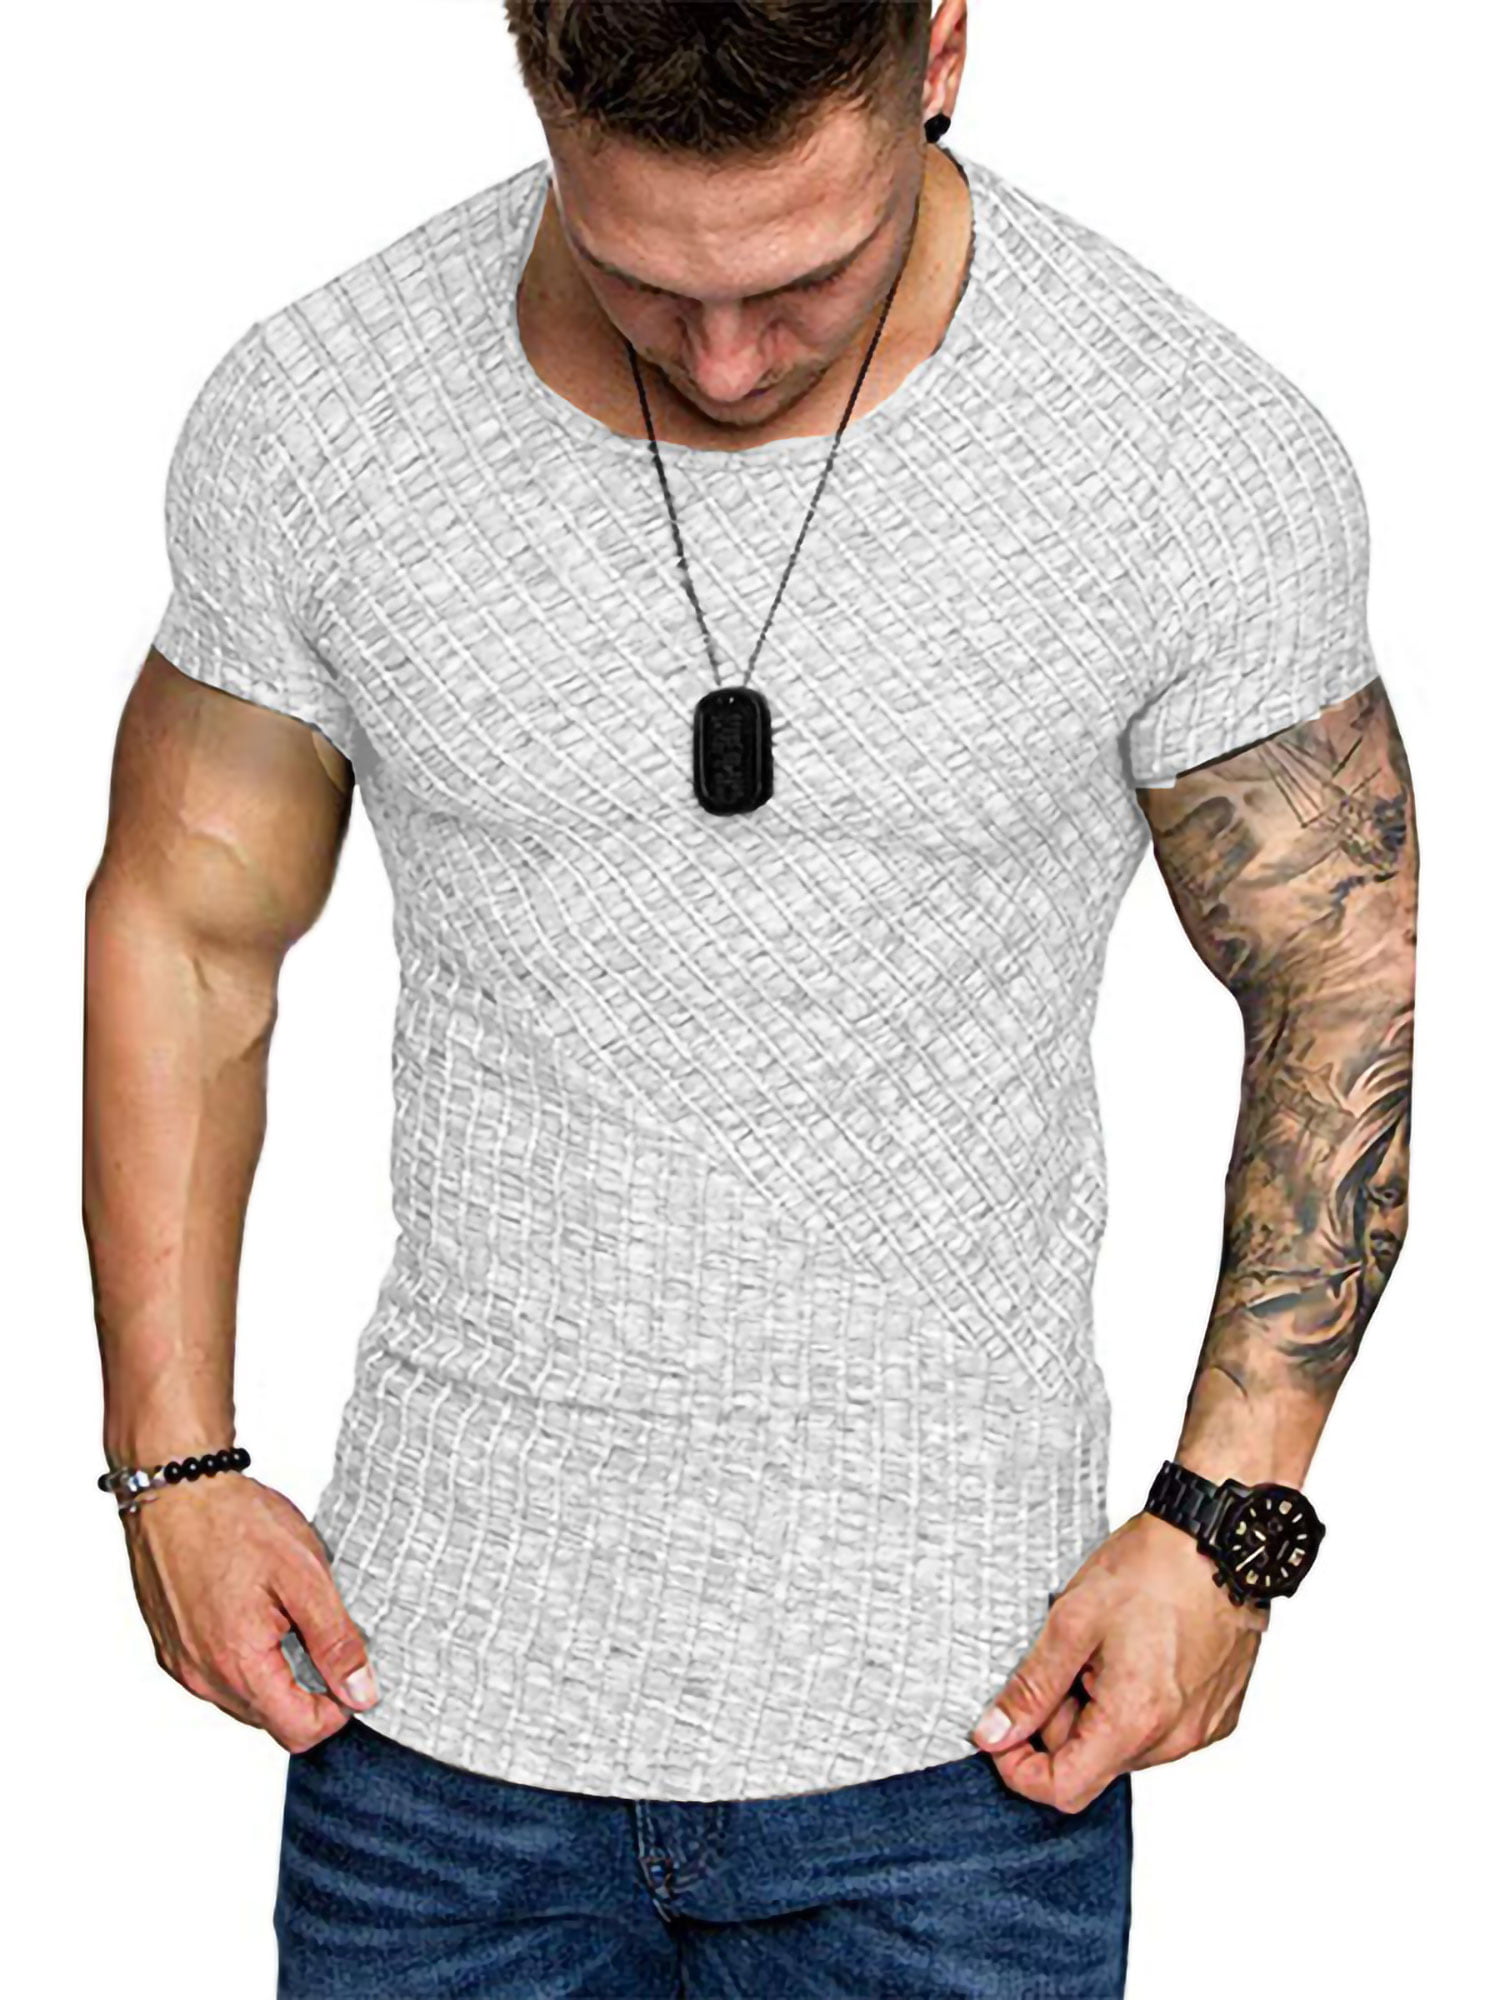 Mens Compression Baselayer Athletic Workout T Shirts Short Sleeve Slim Fit Tee 